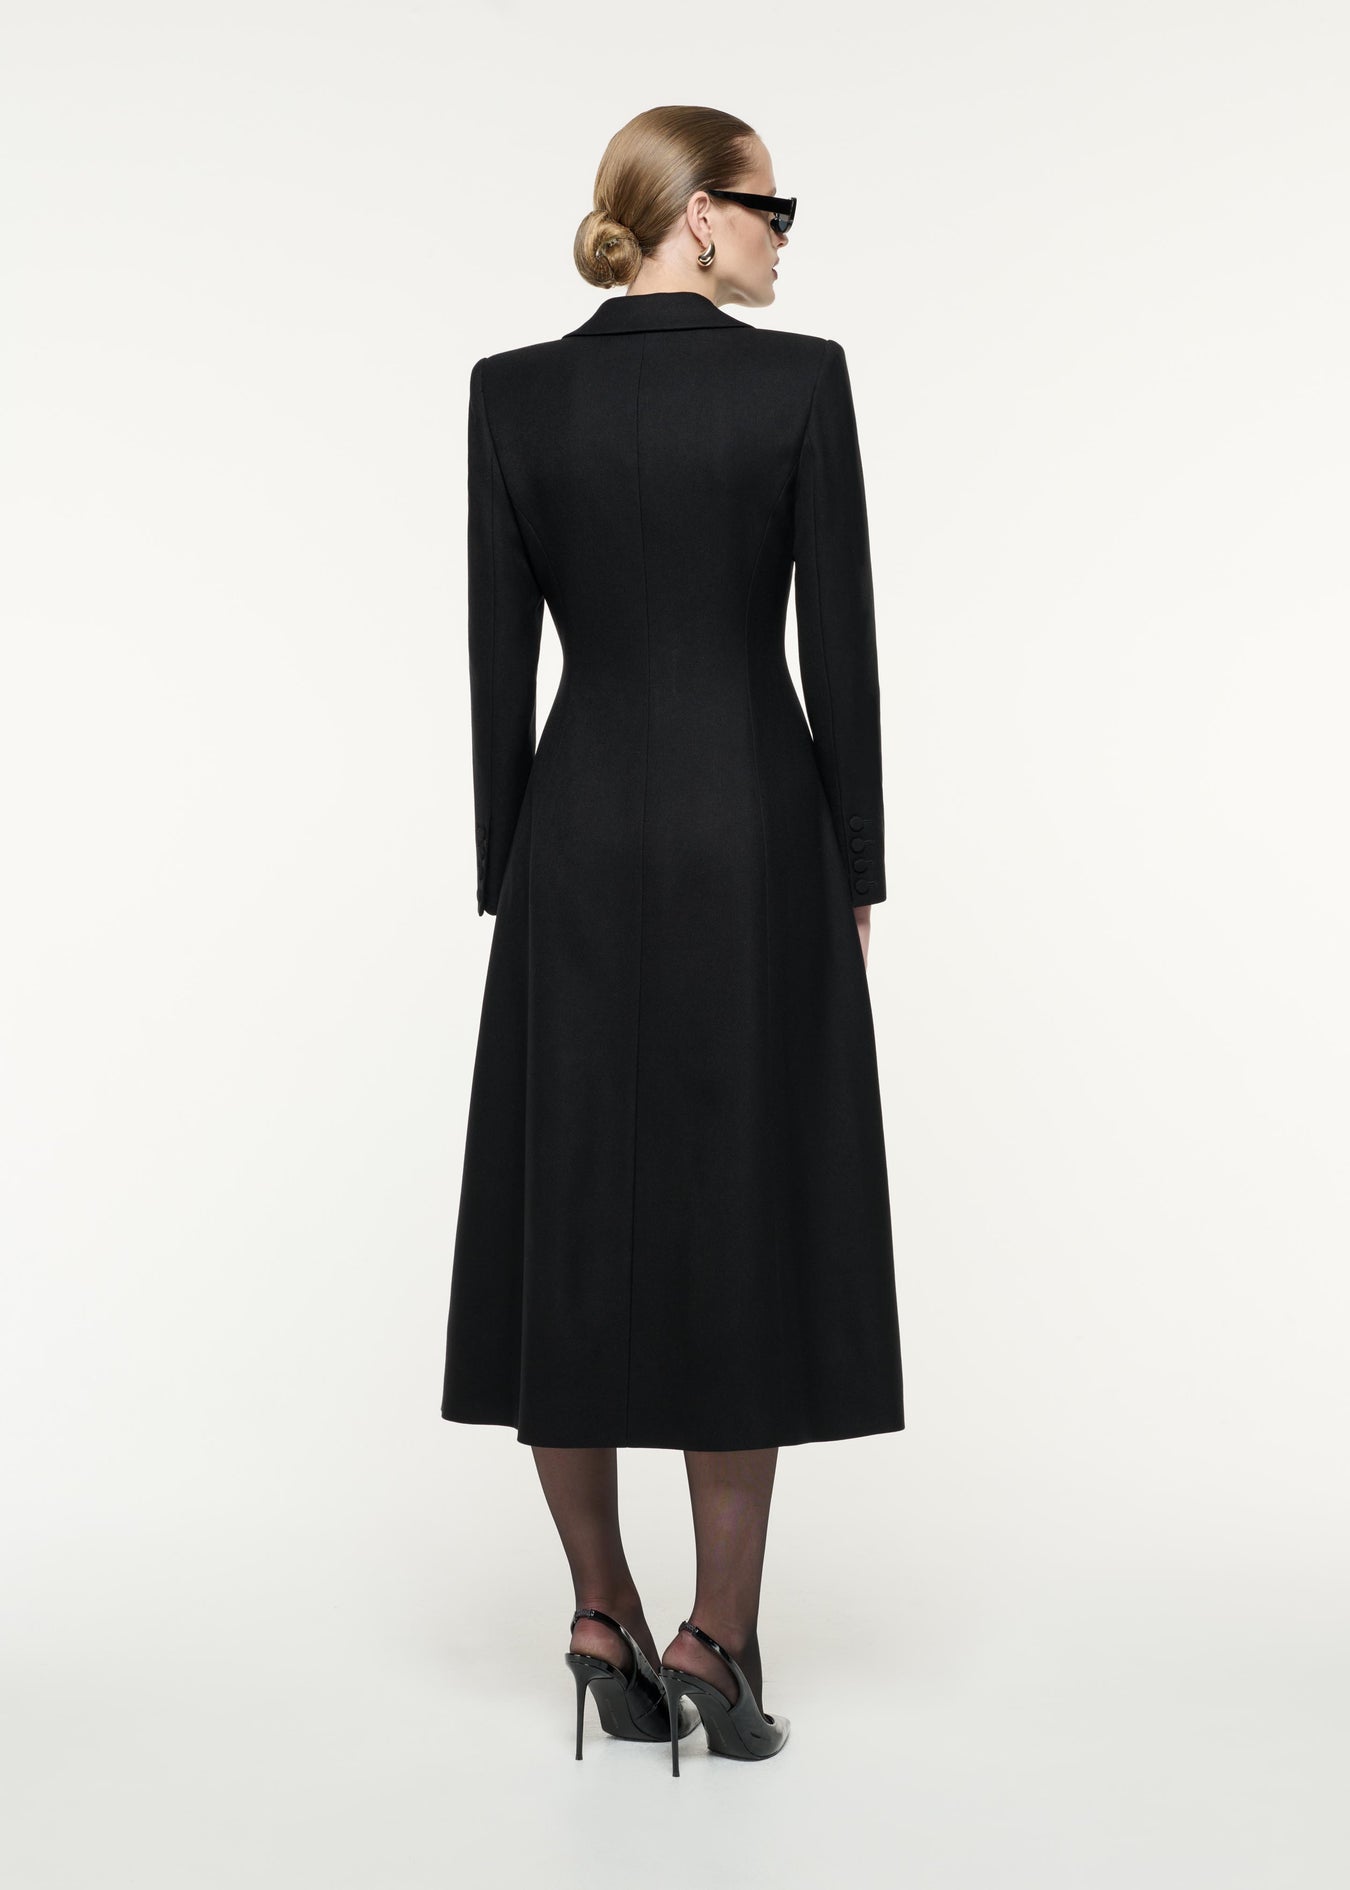 A back view image of a model wearing the Wool Twill Tailored Coat in Black